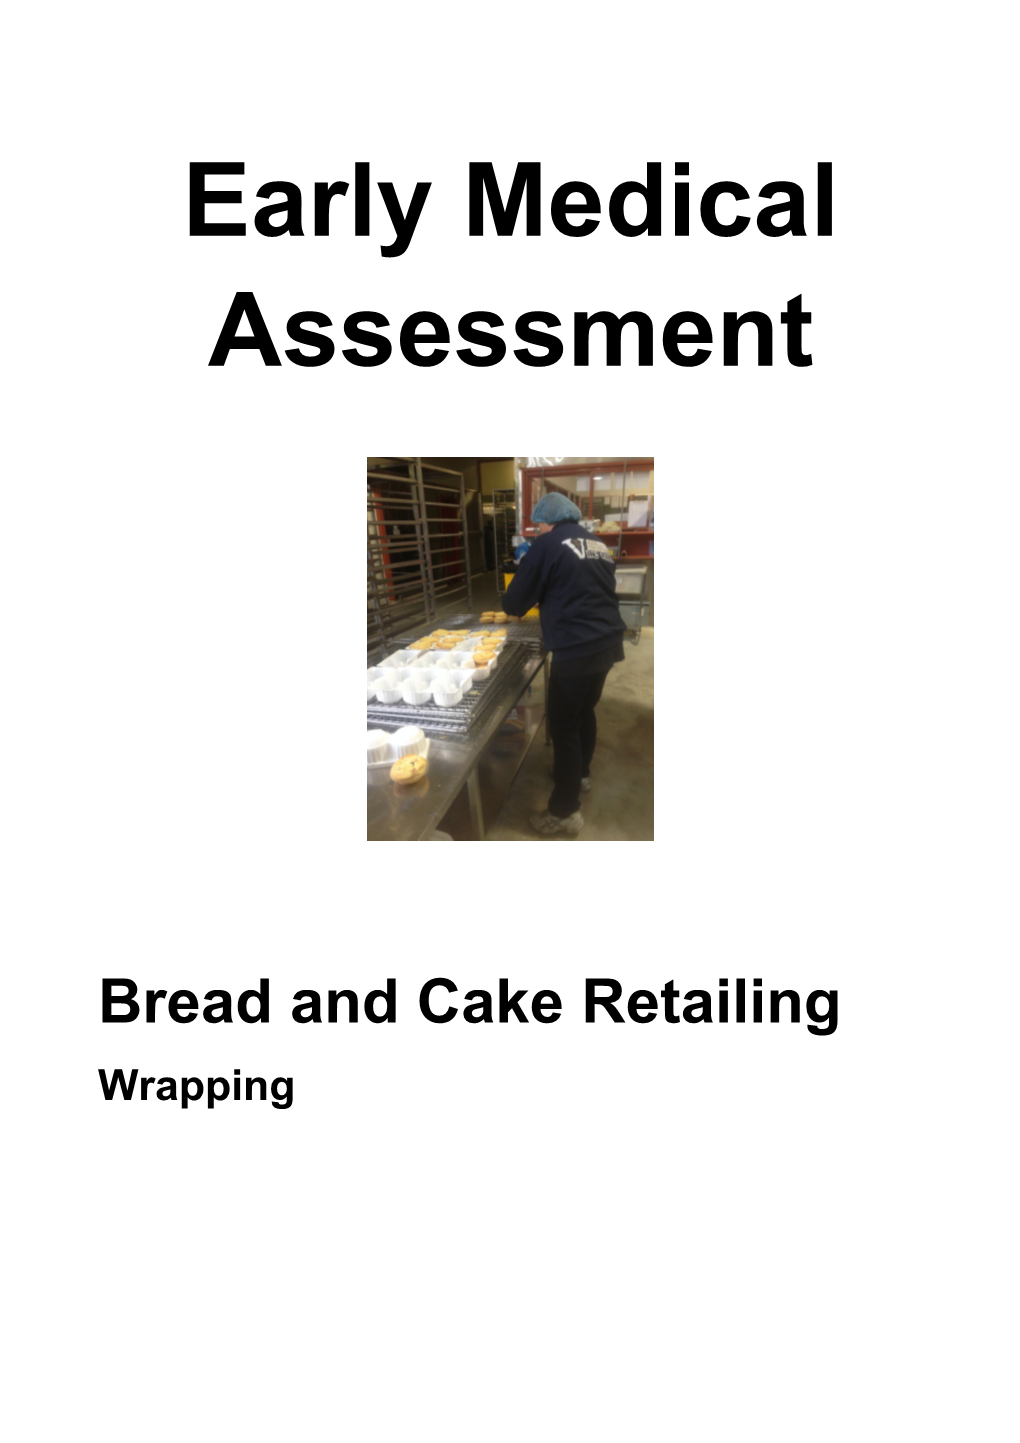 Bread and Cake Retailing - Wrapping